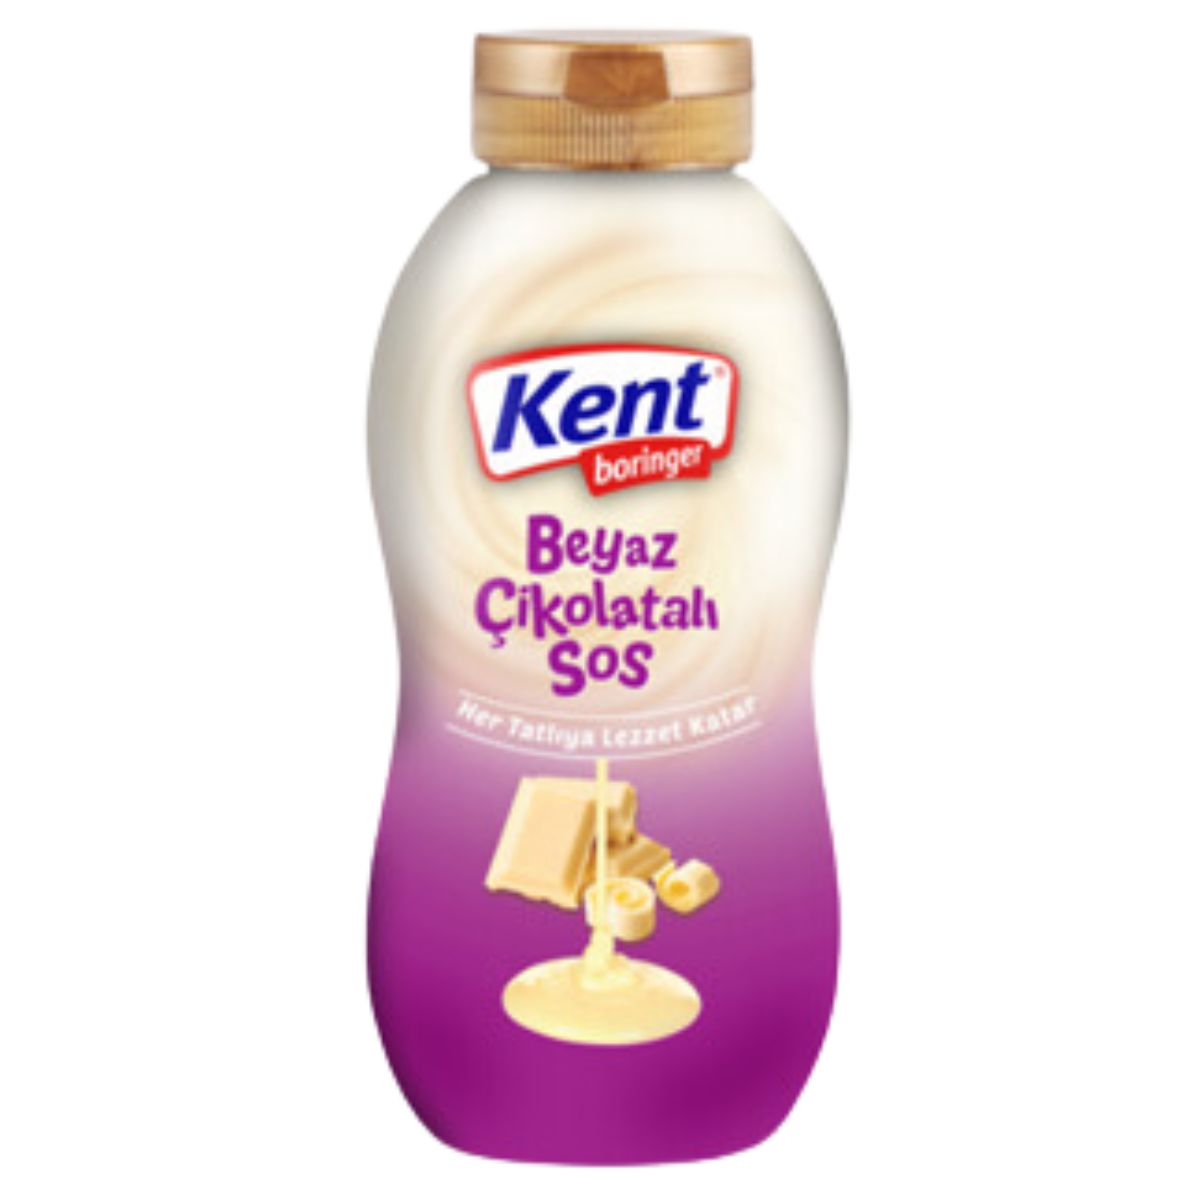 A bottle of Kent - Boringer White Chocolate Sauce - 325g on a purple background.